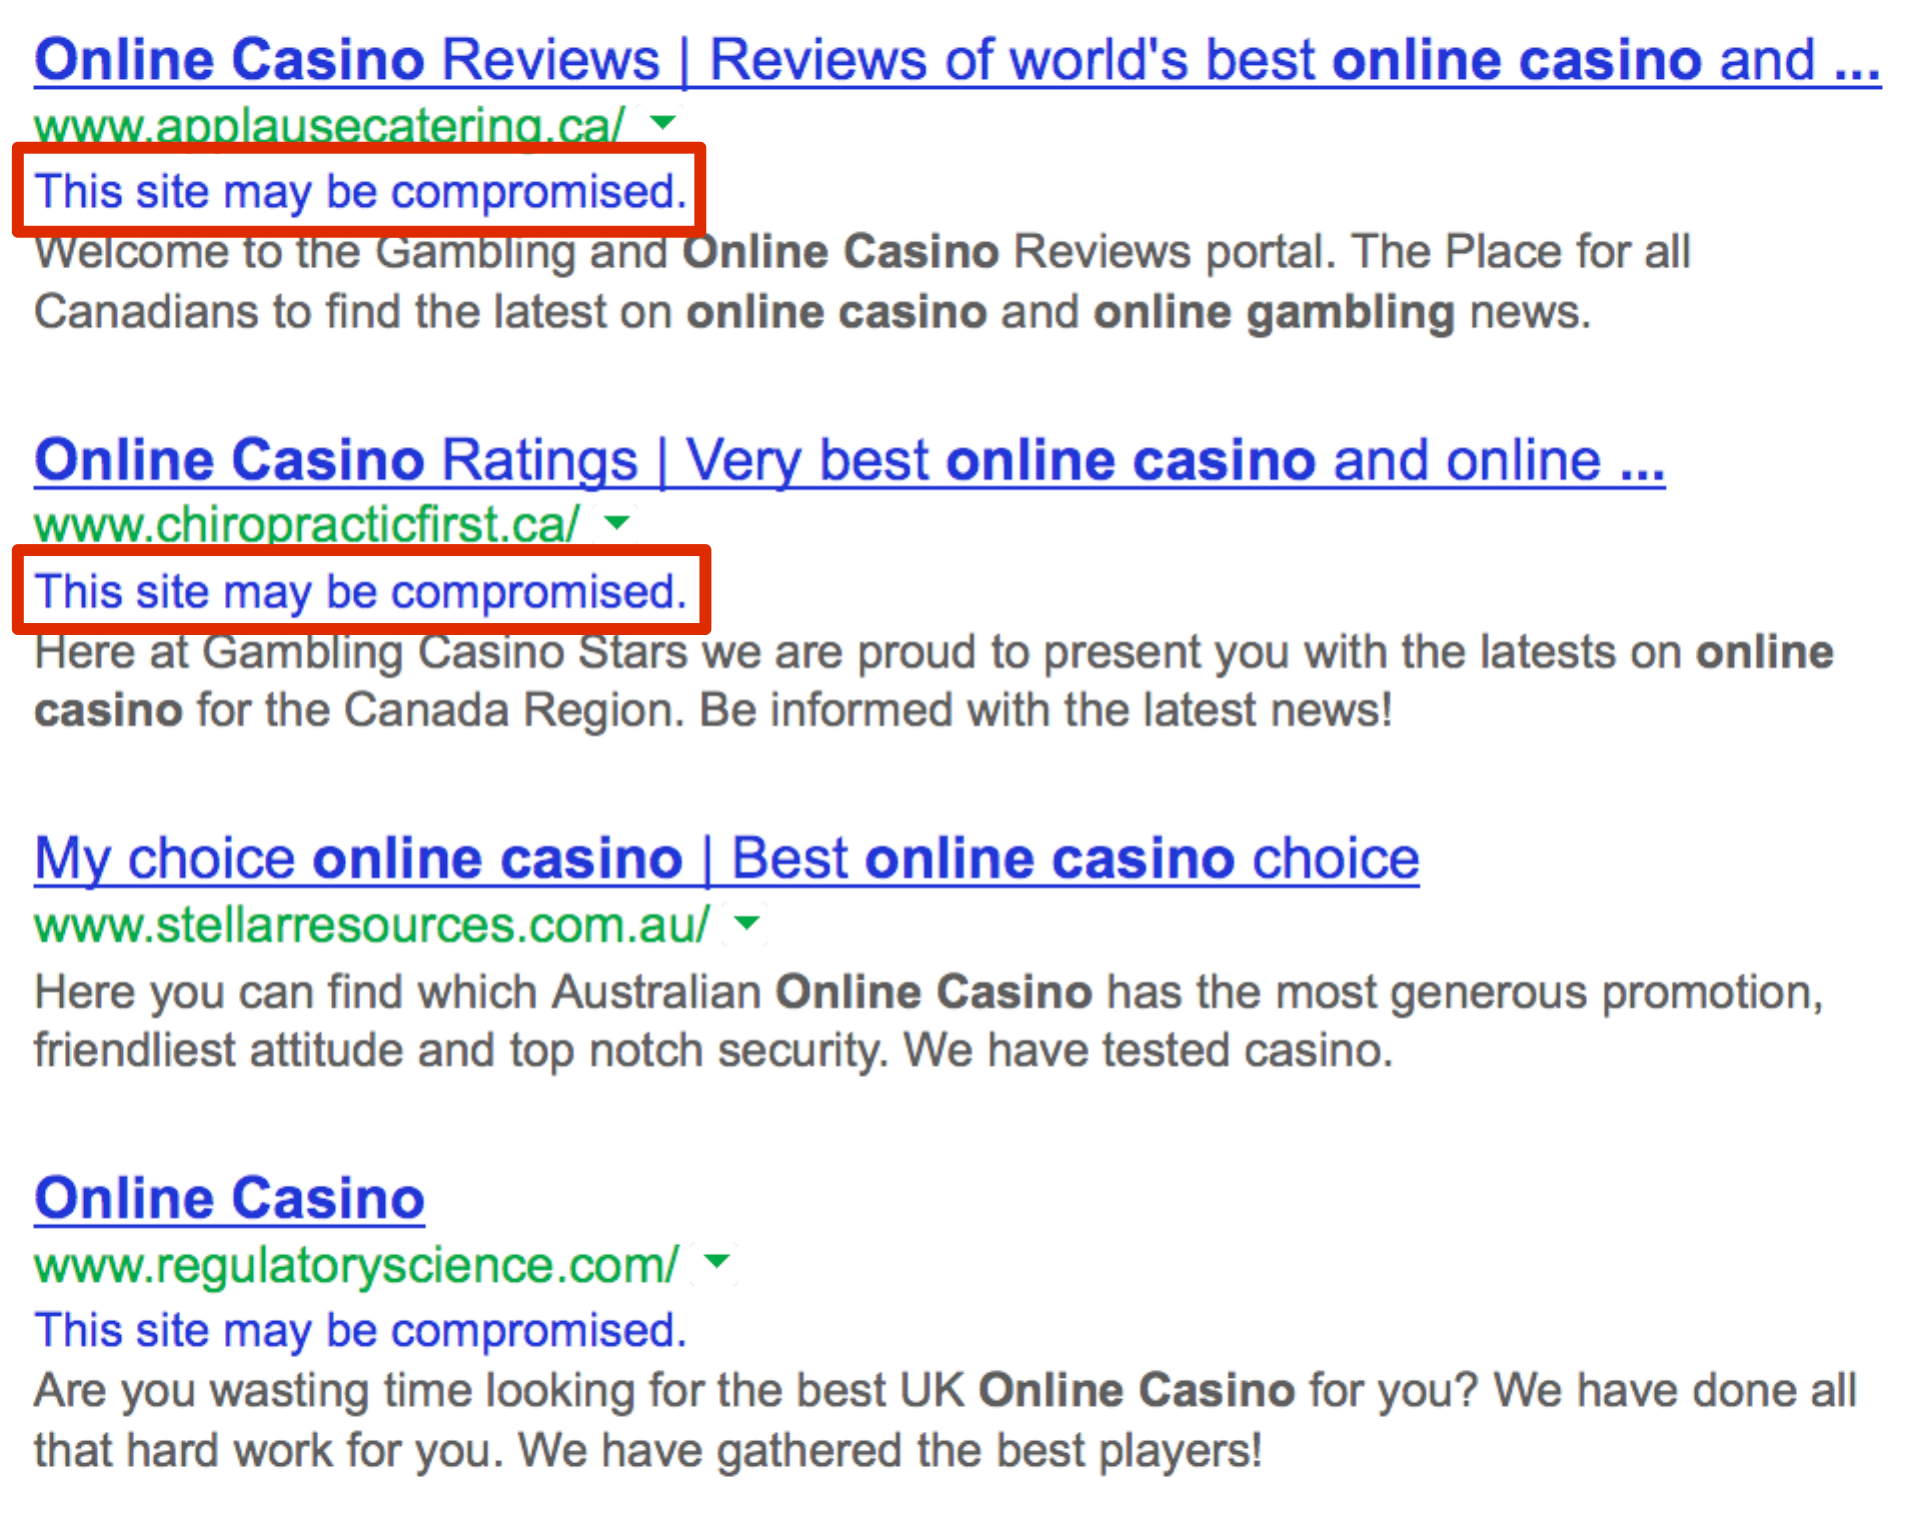 Online Casino review